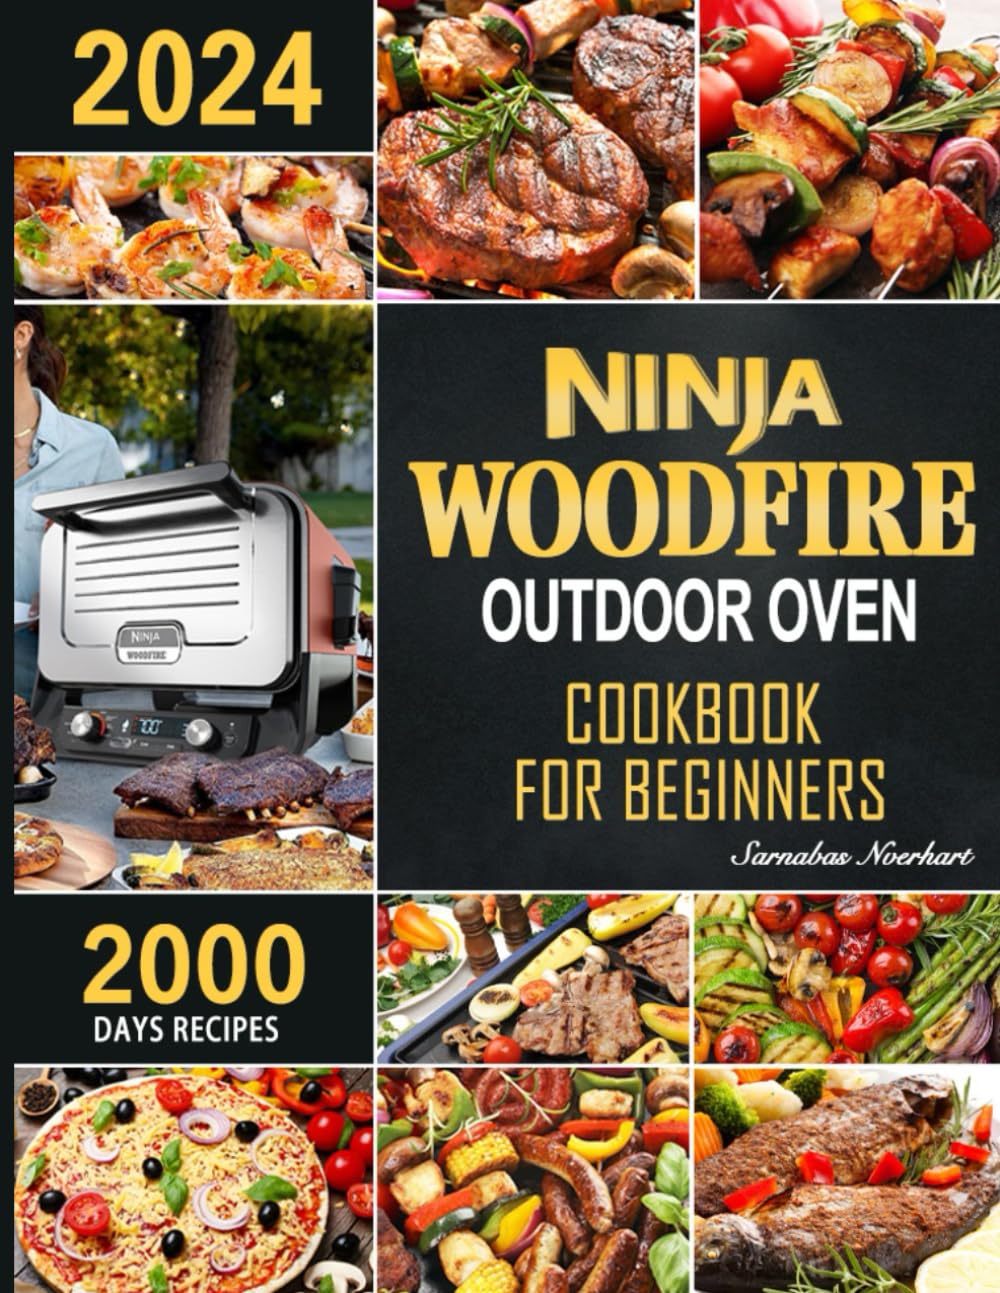 Ninja Woodfire Outdoor Oven Cookbook for Beginners: 2000 Days Fast & Mouth-Watering Recipes, Enjoy Outdoor Barbecue Fun | Become A Pizza ＆ Grill Master in No Time!